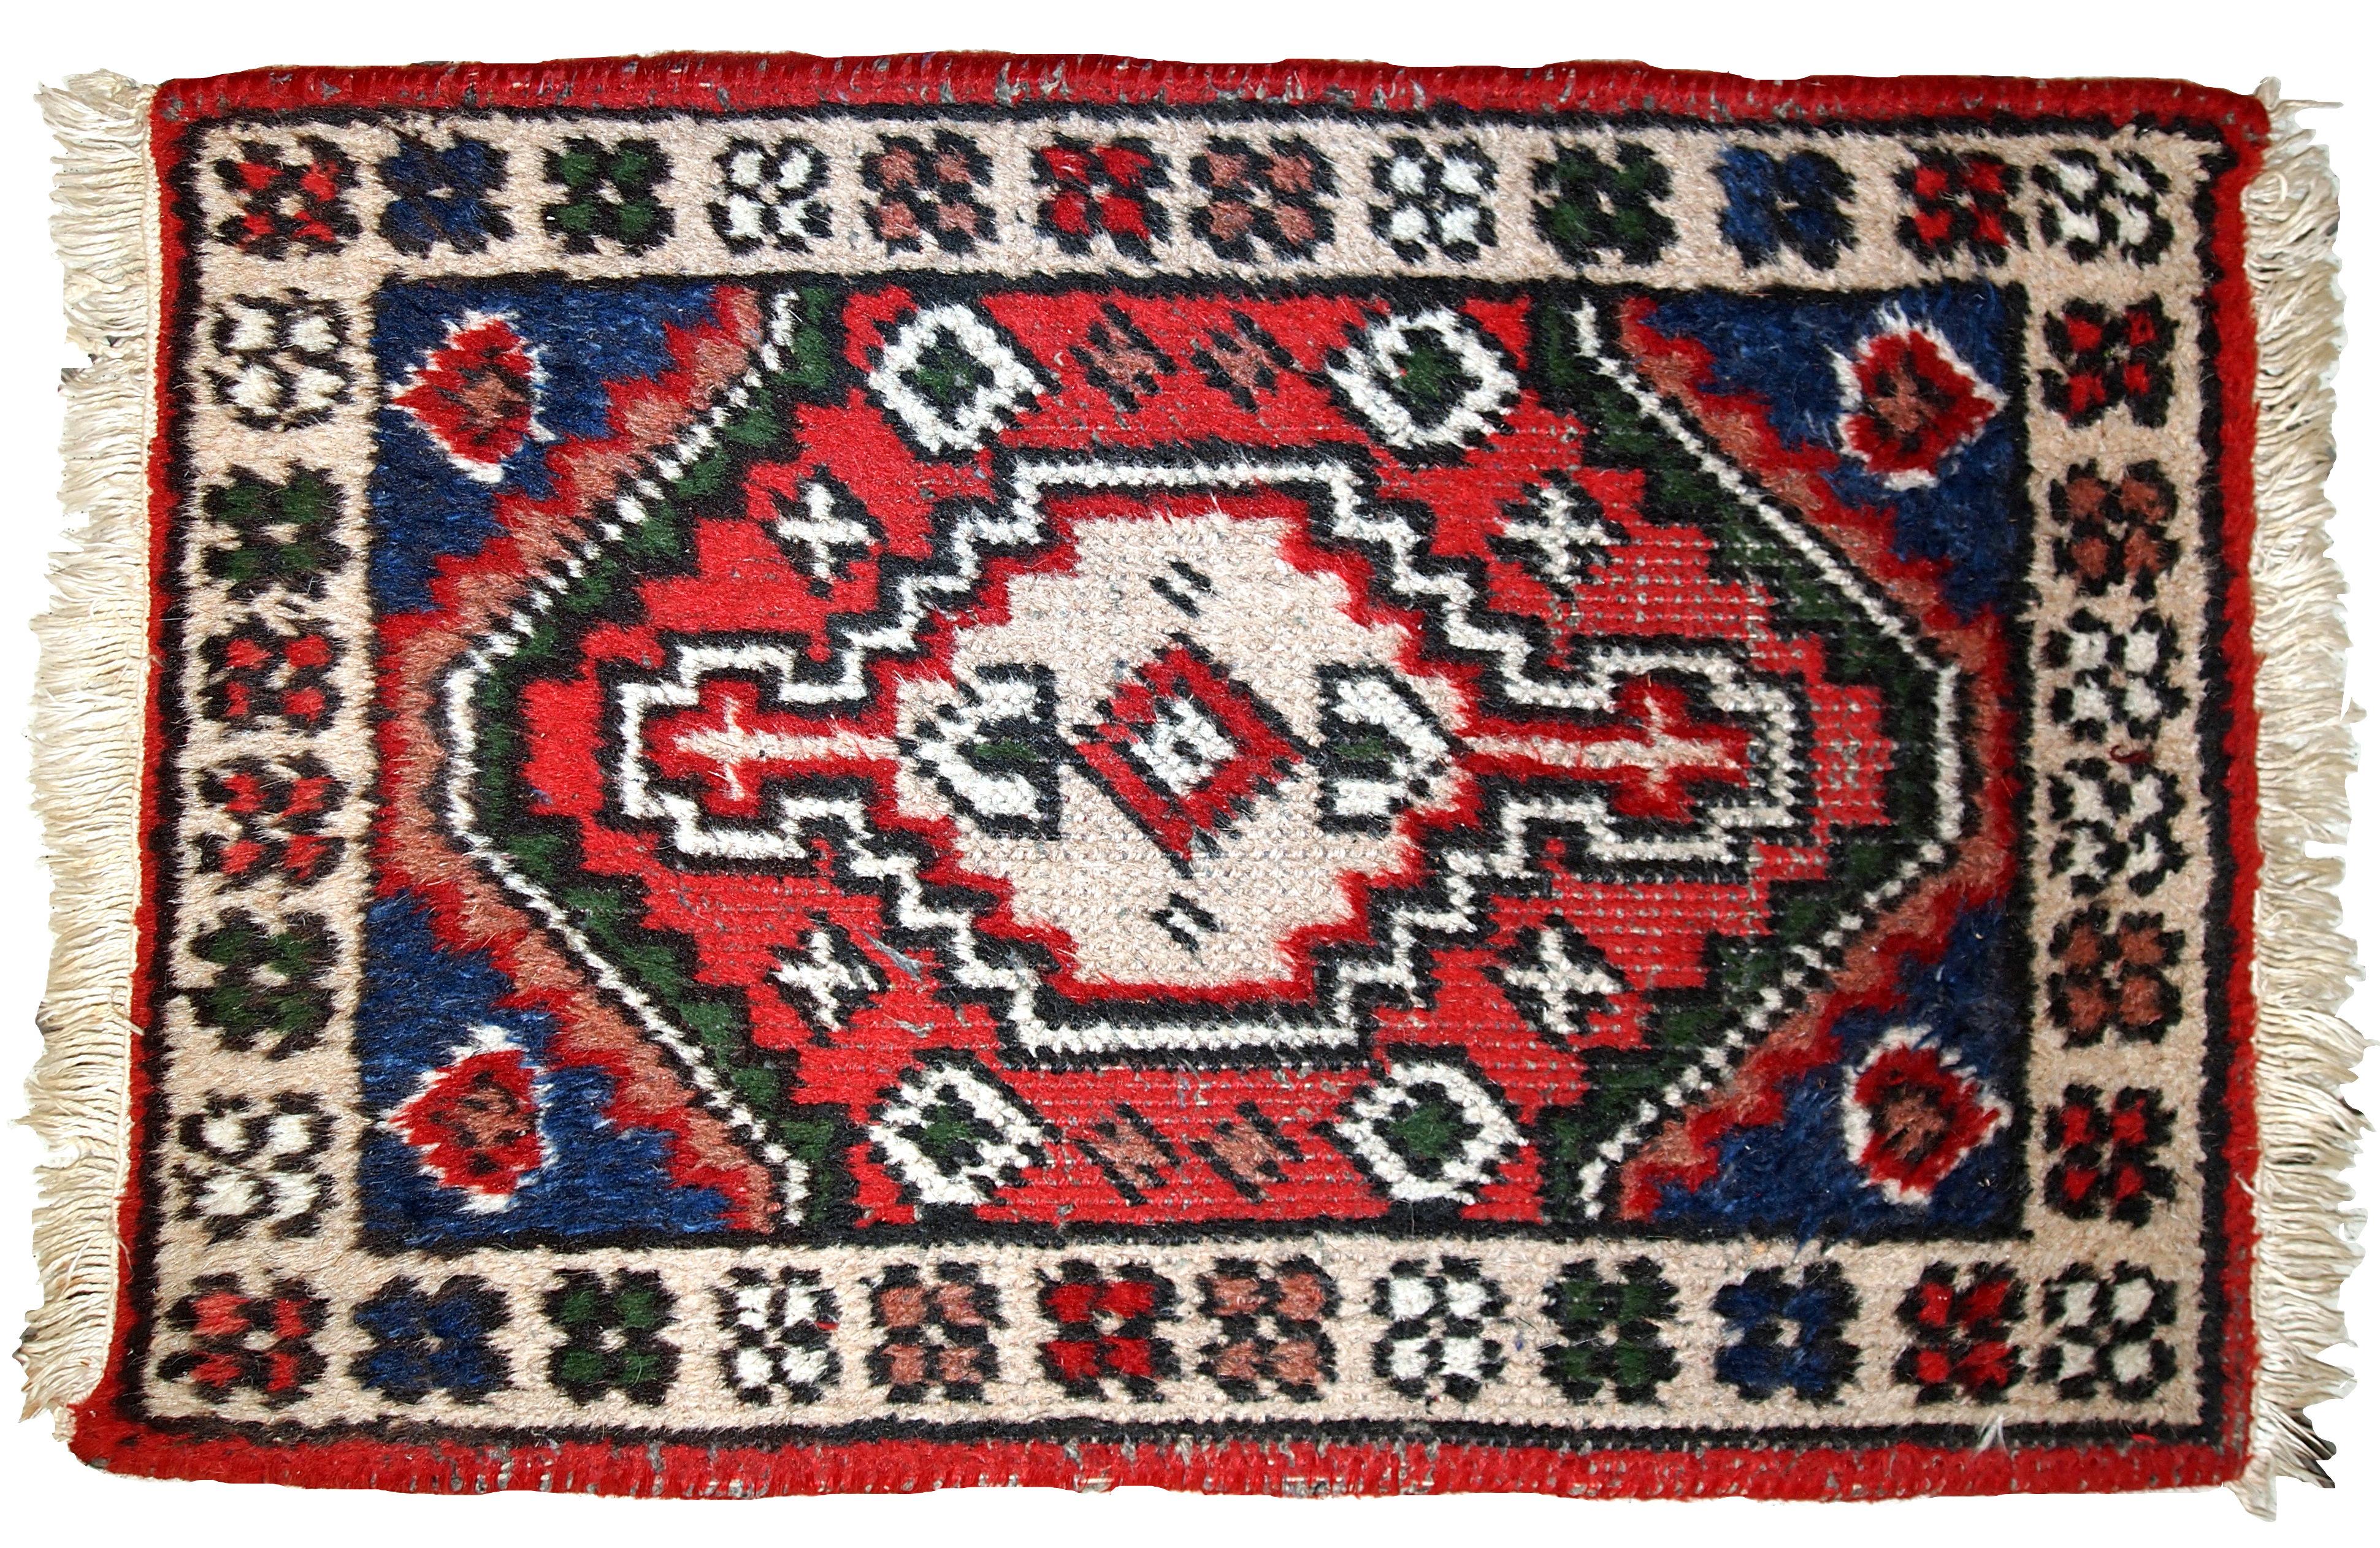 Vintage handmade Hamadan style mat from the end of 20th century. It is in original condition, some low pile.

- Condition: original, some low pile,

- circa 1970s,

- Size: 1.3' x 1.9' (40cm x 59cm),

- Material: wool,

- Country of